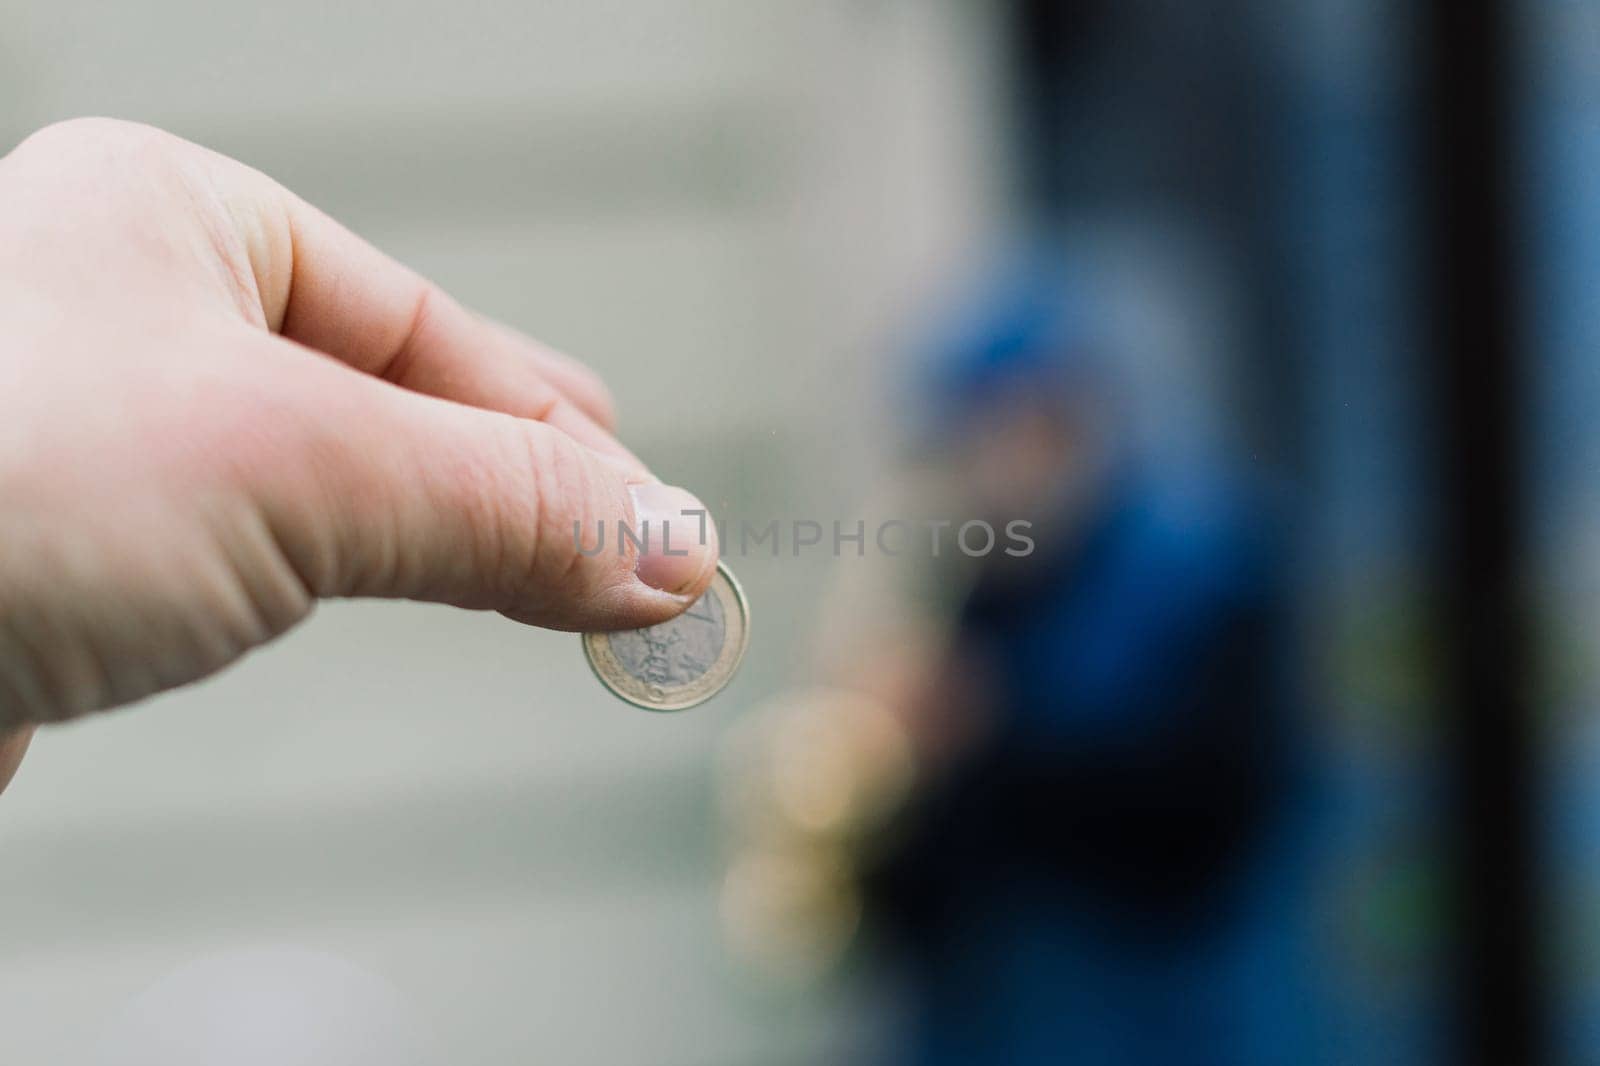 Street old performer musician plays saxofon blurred, coin in a hand focused